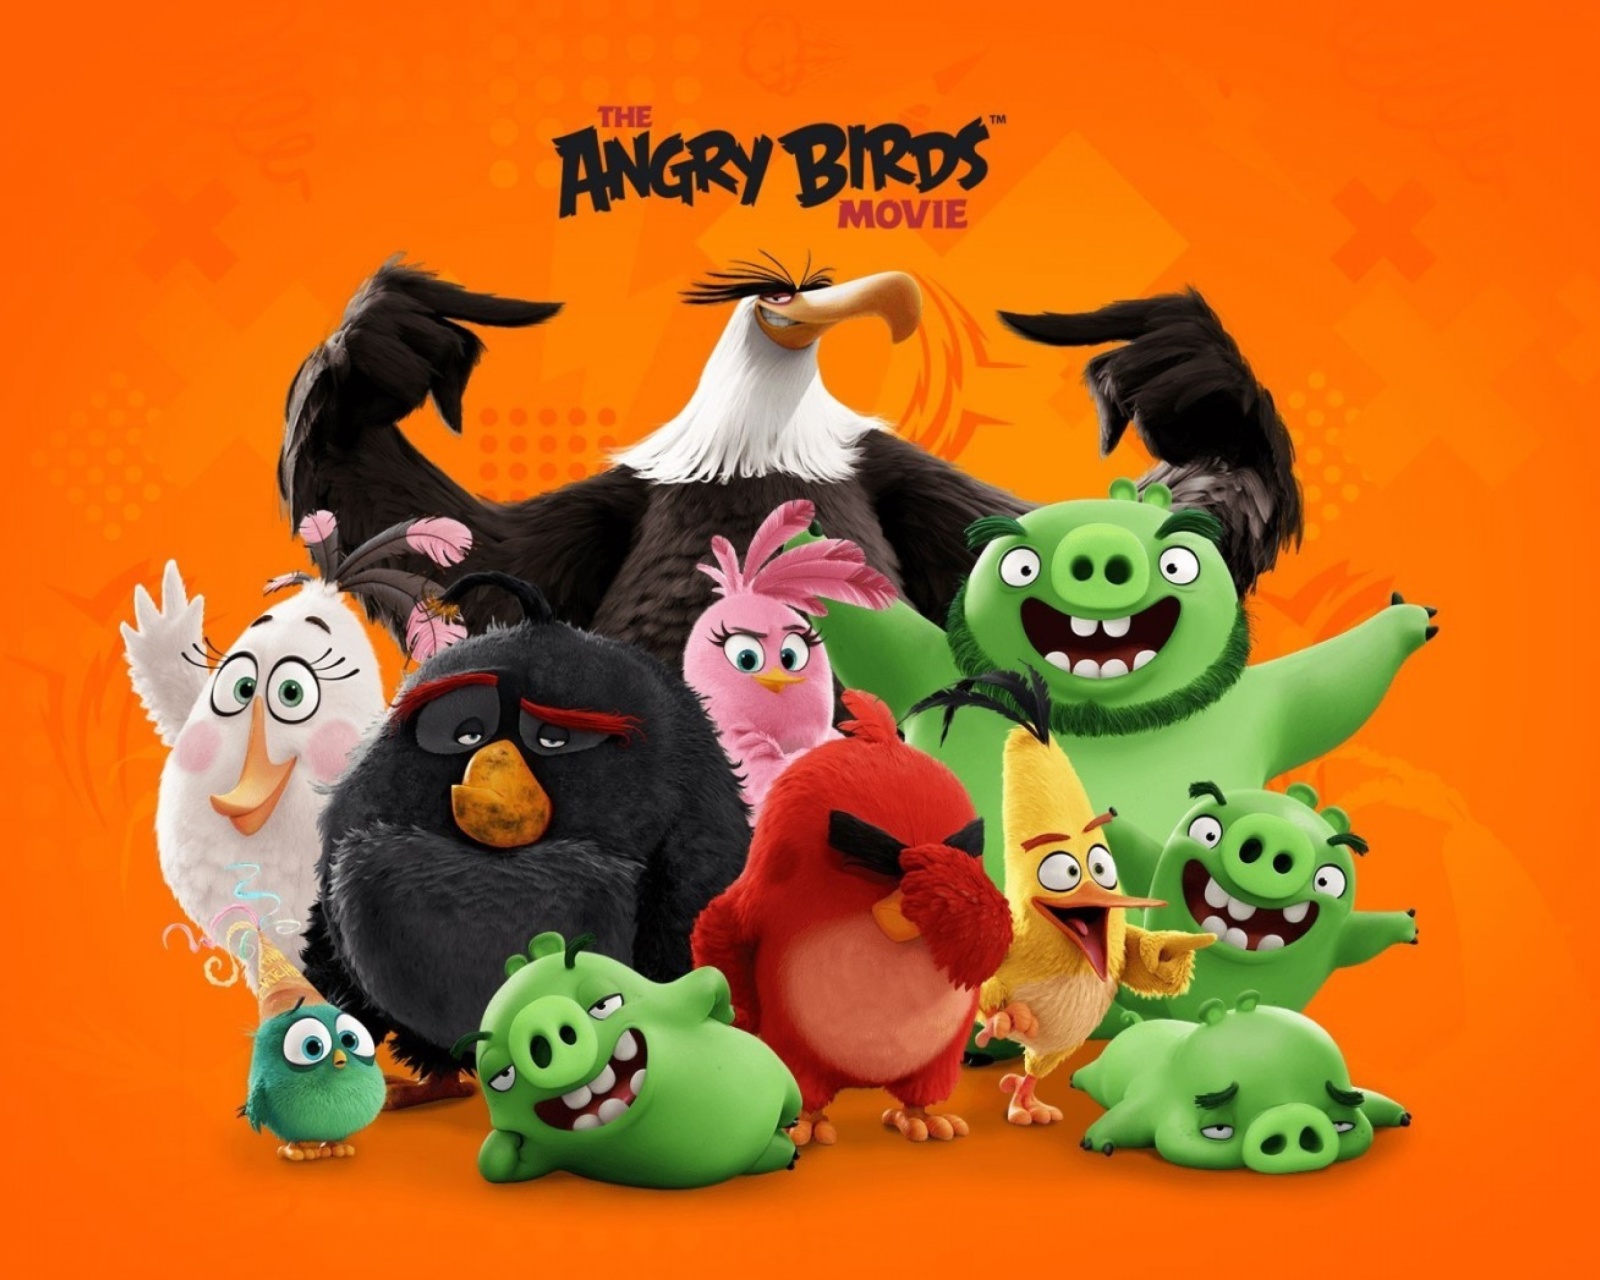 Angry Birds the Movie Release by Rovio screenshot #1 1600x1280